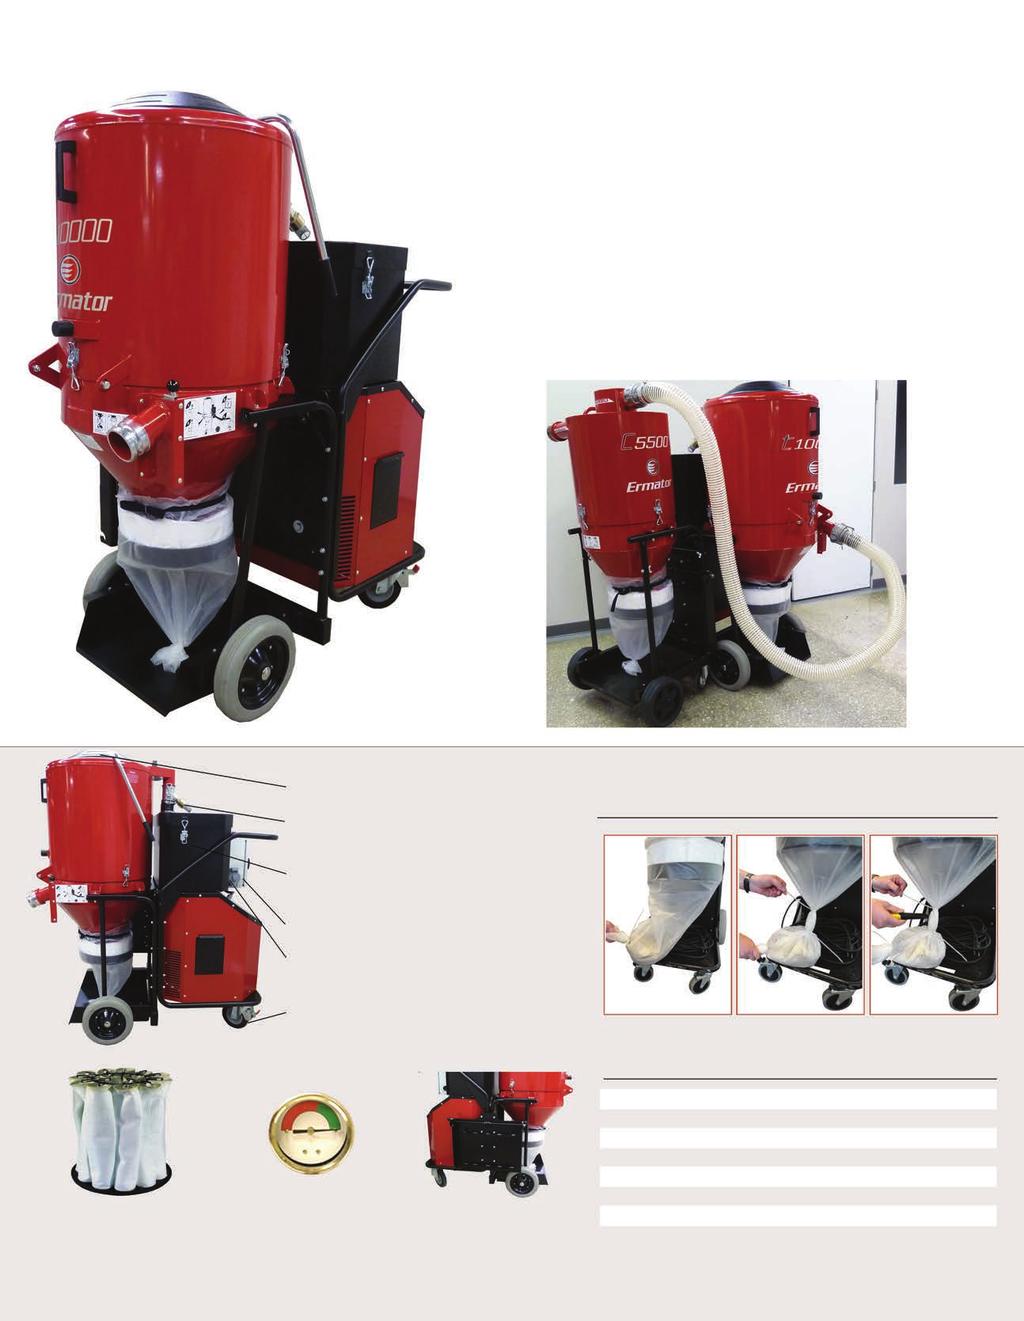 T10000 3P HEPA Dust Extractor Creating Clean Air for Construction, Abatement, and Restoration When used in tandem with the C5500, the 480Volt T10000 represents the most powerful HEPA Dust Extractor /